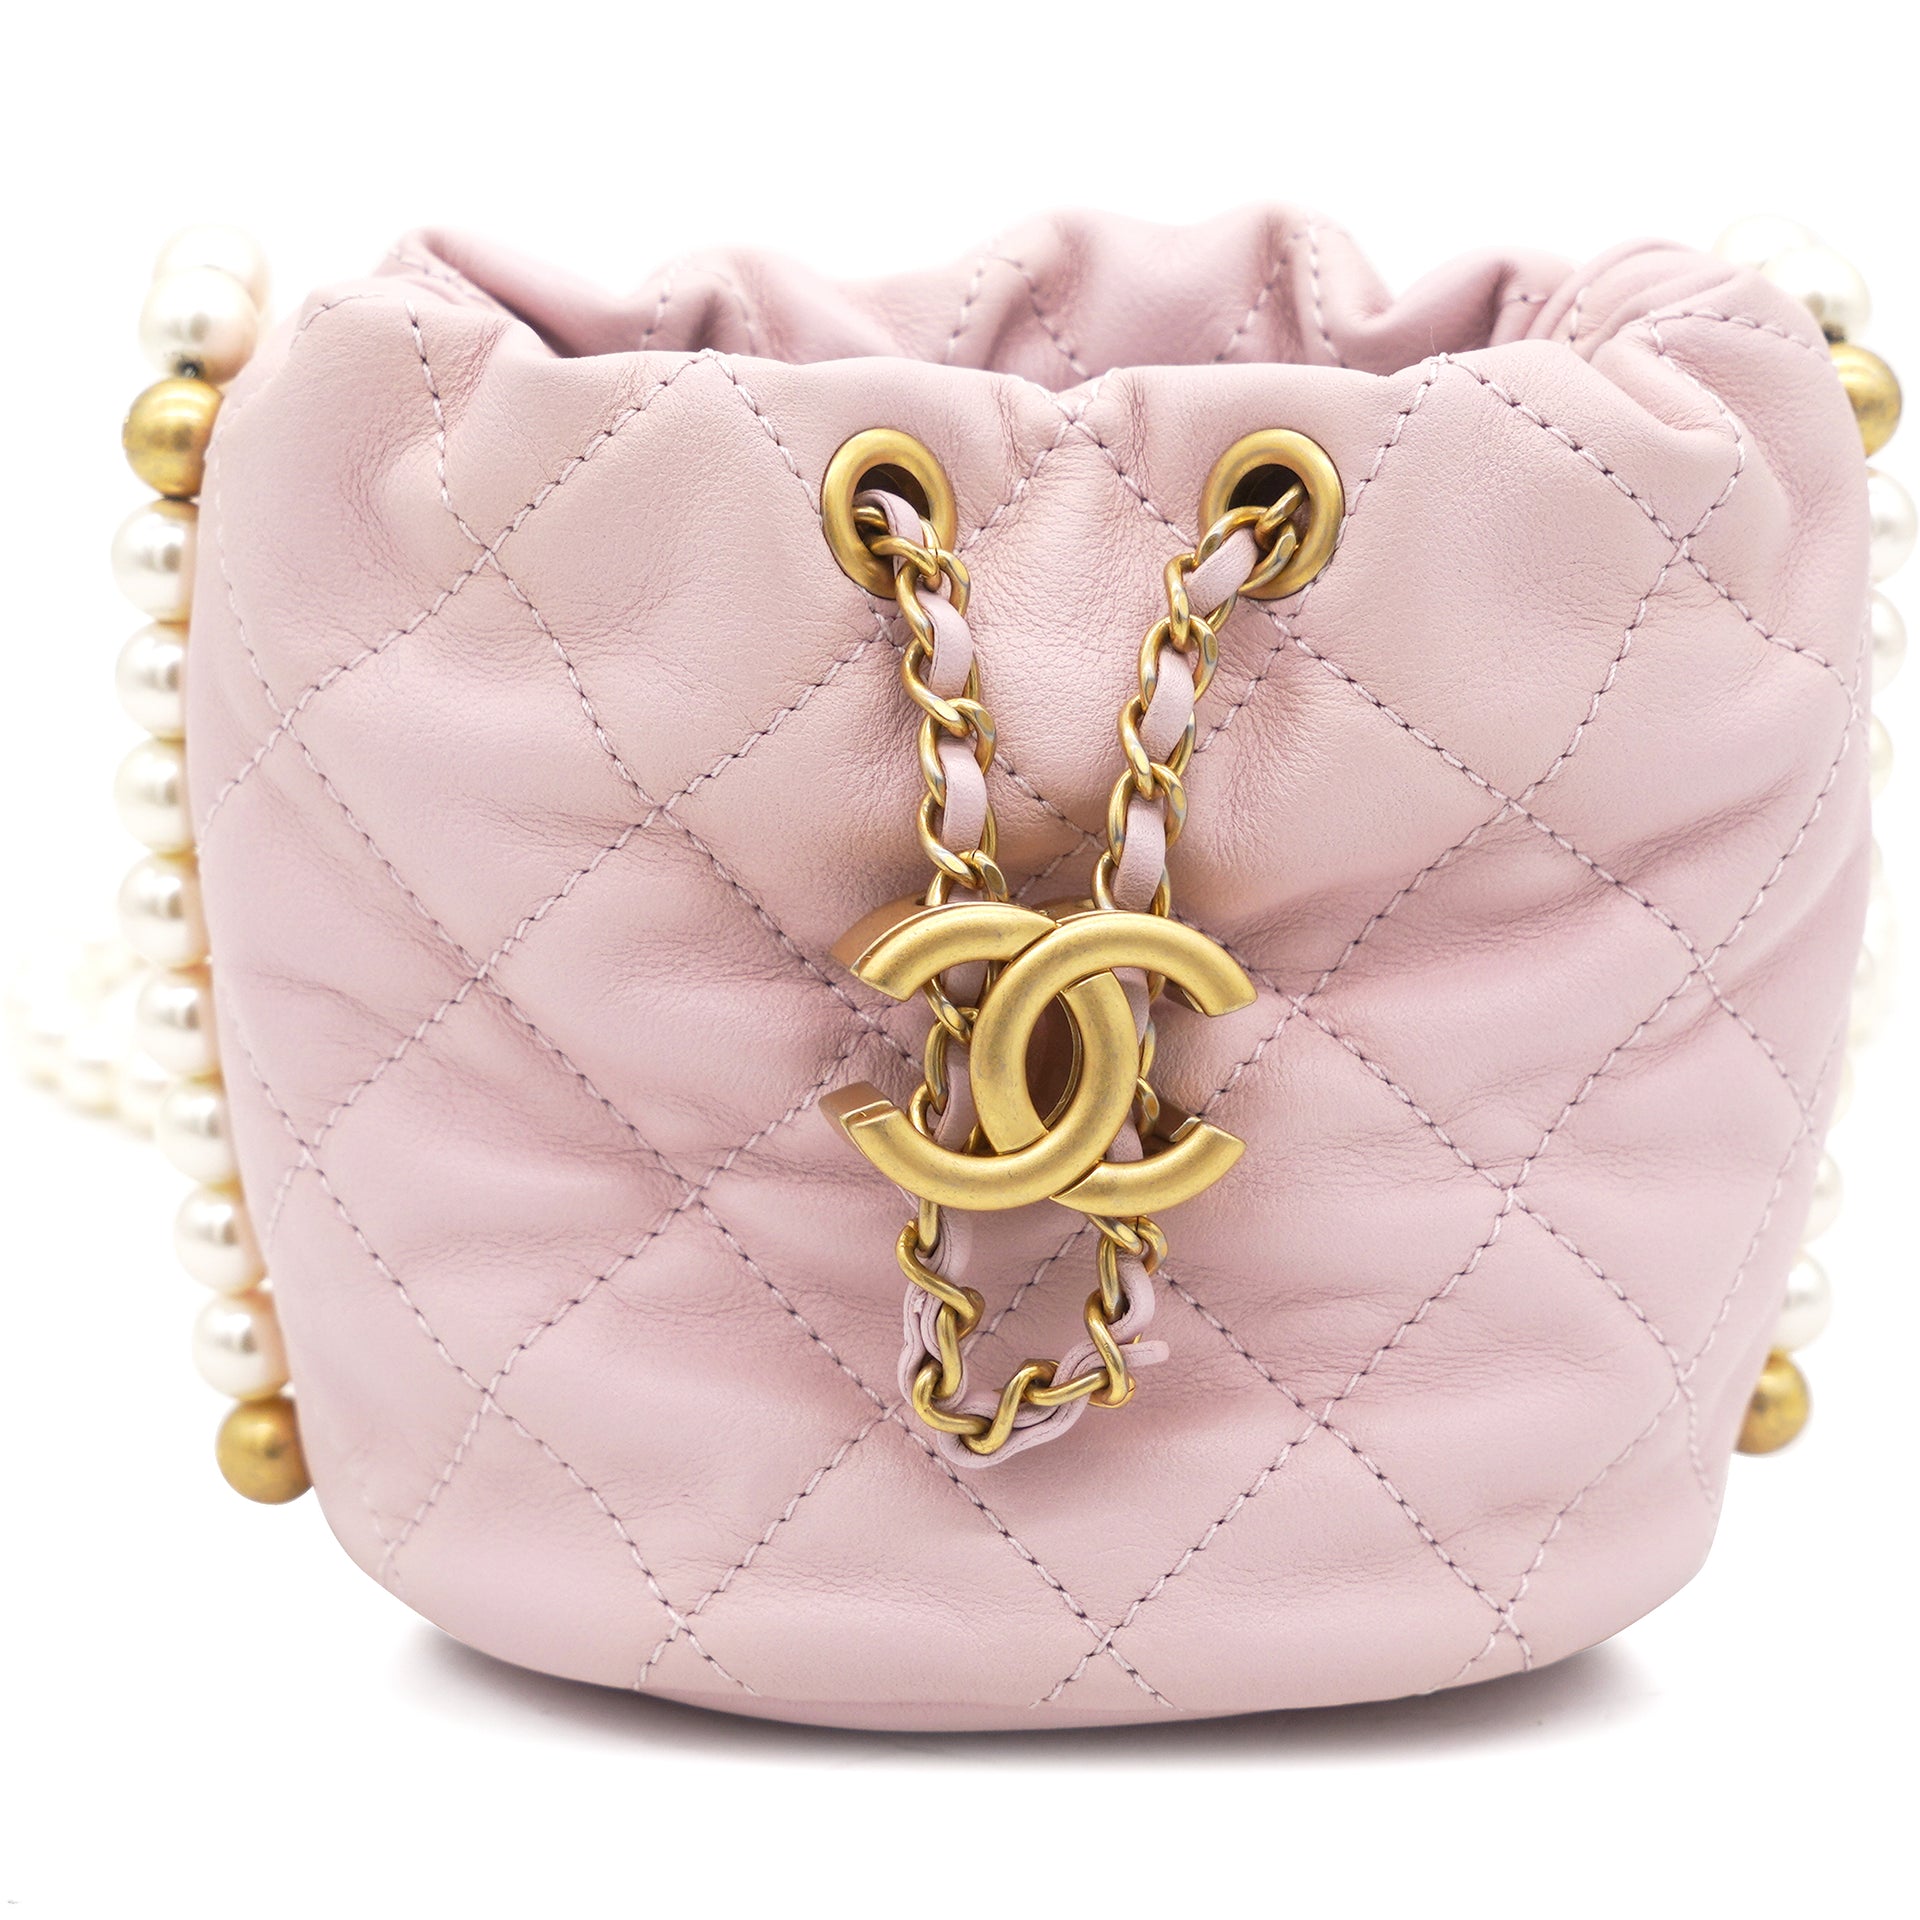 Chanel Small 22 Bag Pink Calfskin Antique Gold Hardware – Madison